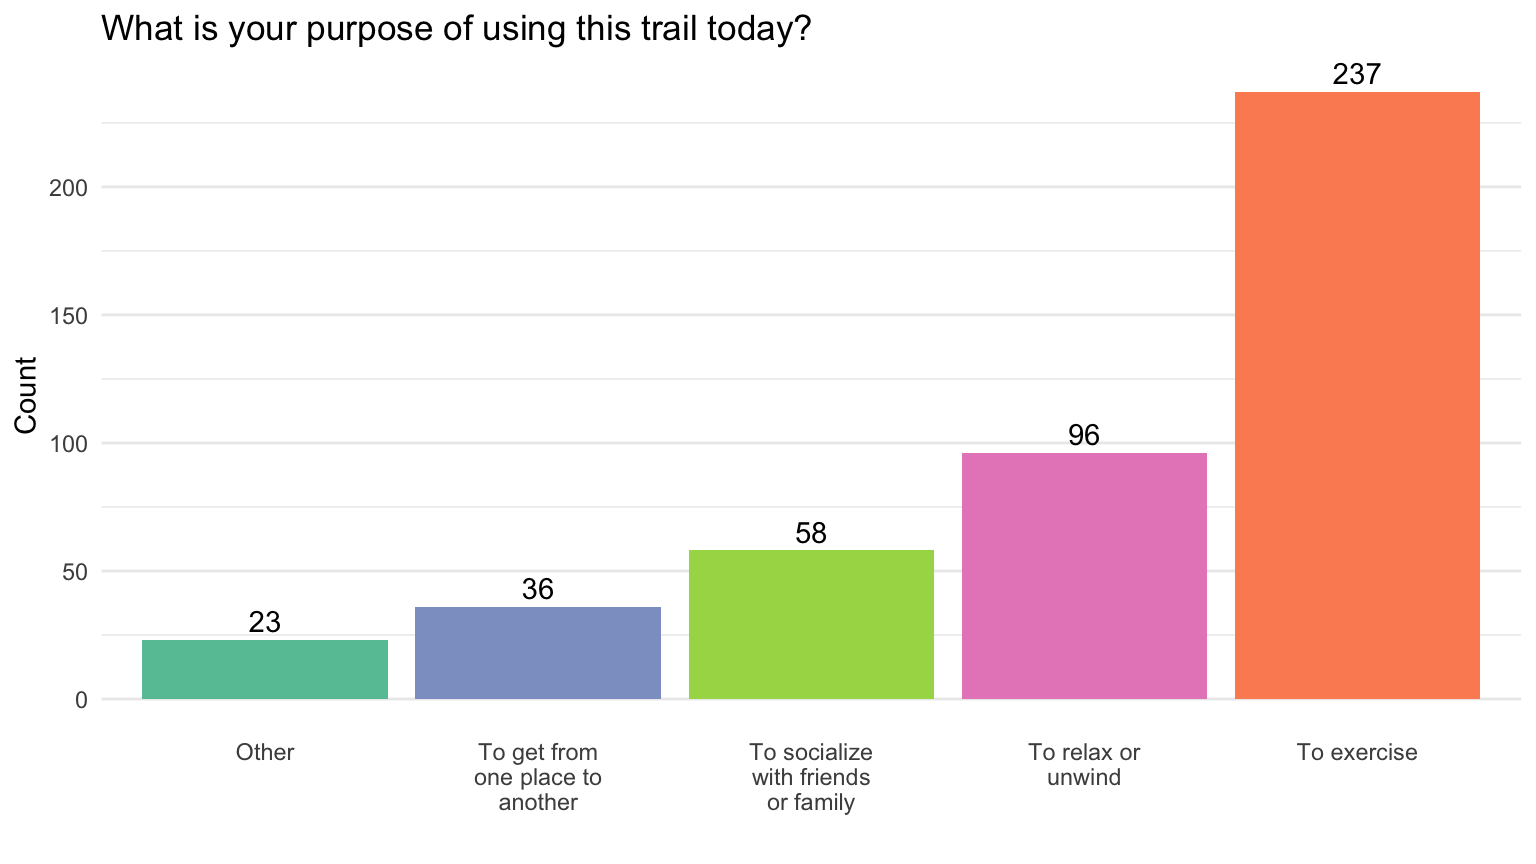 The most purpose of using the trail was to exercise. (Details)